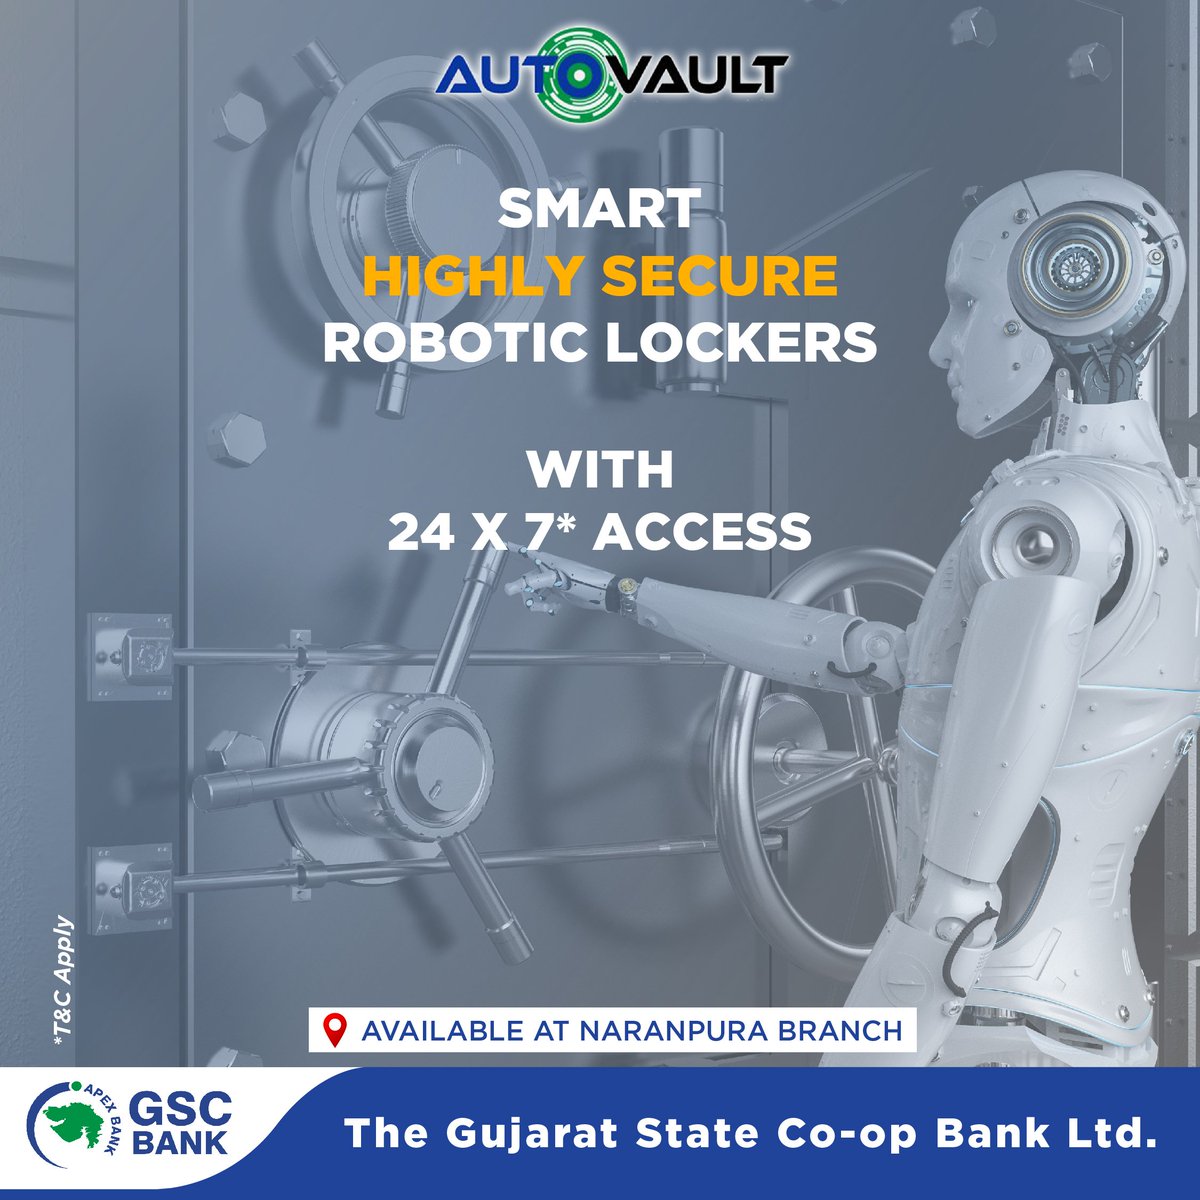 AUTO VAULT- THE SMART HIGHLY SECURE ROBOTIC LOCKERS WITH LARGE
STORAGE SPACES TO INCLUDE ALL YOUR VALUABLES.
AVAILABLE AT NARANPURA BRANCH.
#Autovault #GSCbank #FullyAutomated #AdvancedSecurity #Robotic #AttractiveRent #Safety #Valuables #digitalsafety #Unique #Safedepositvault